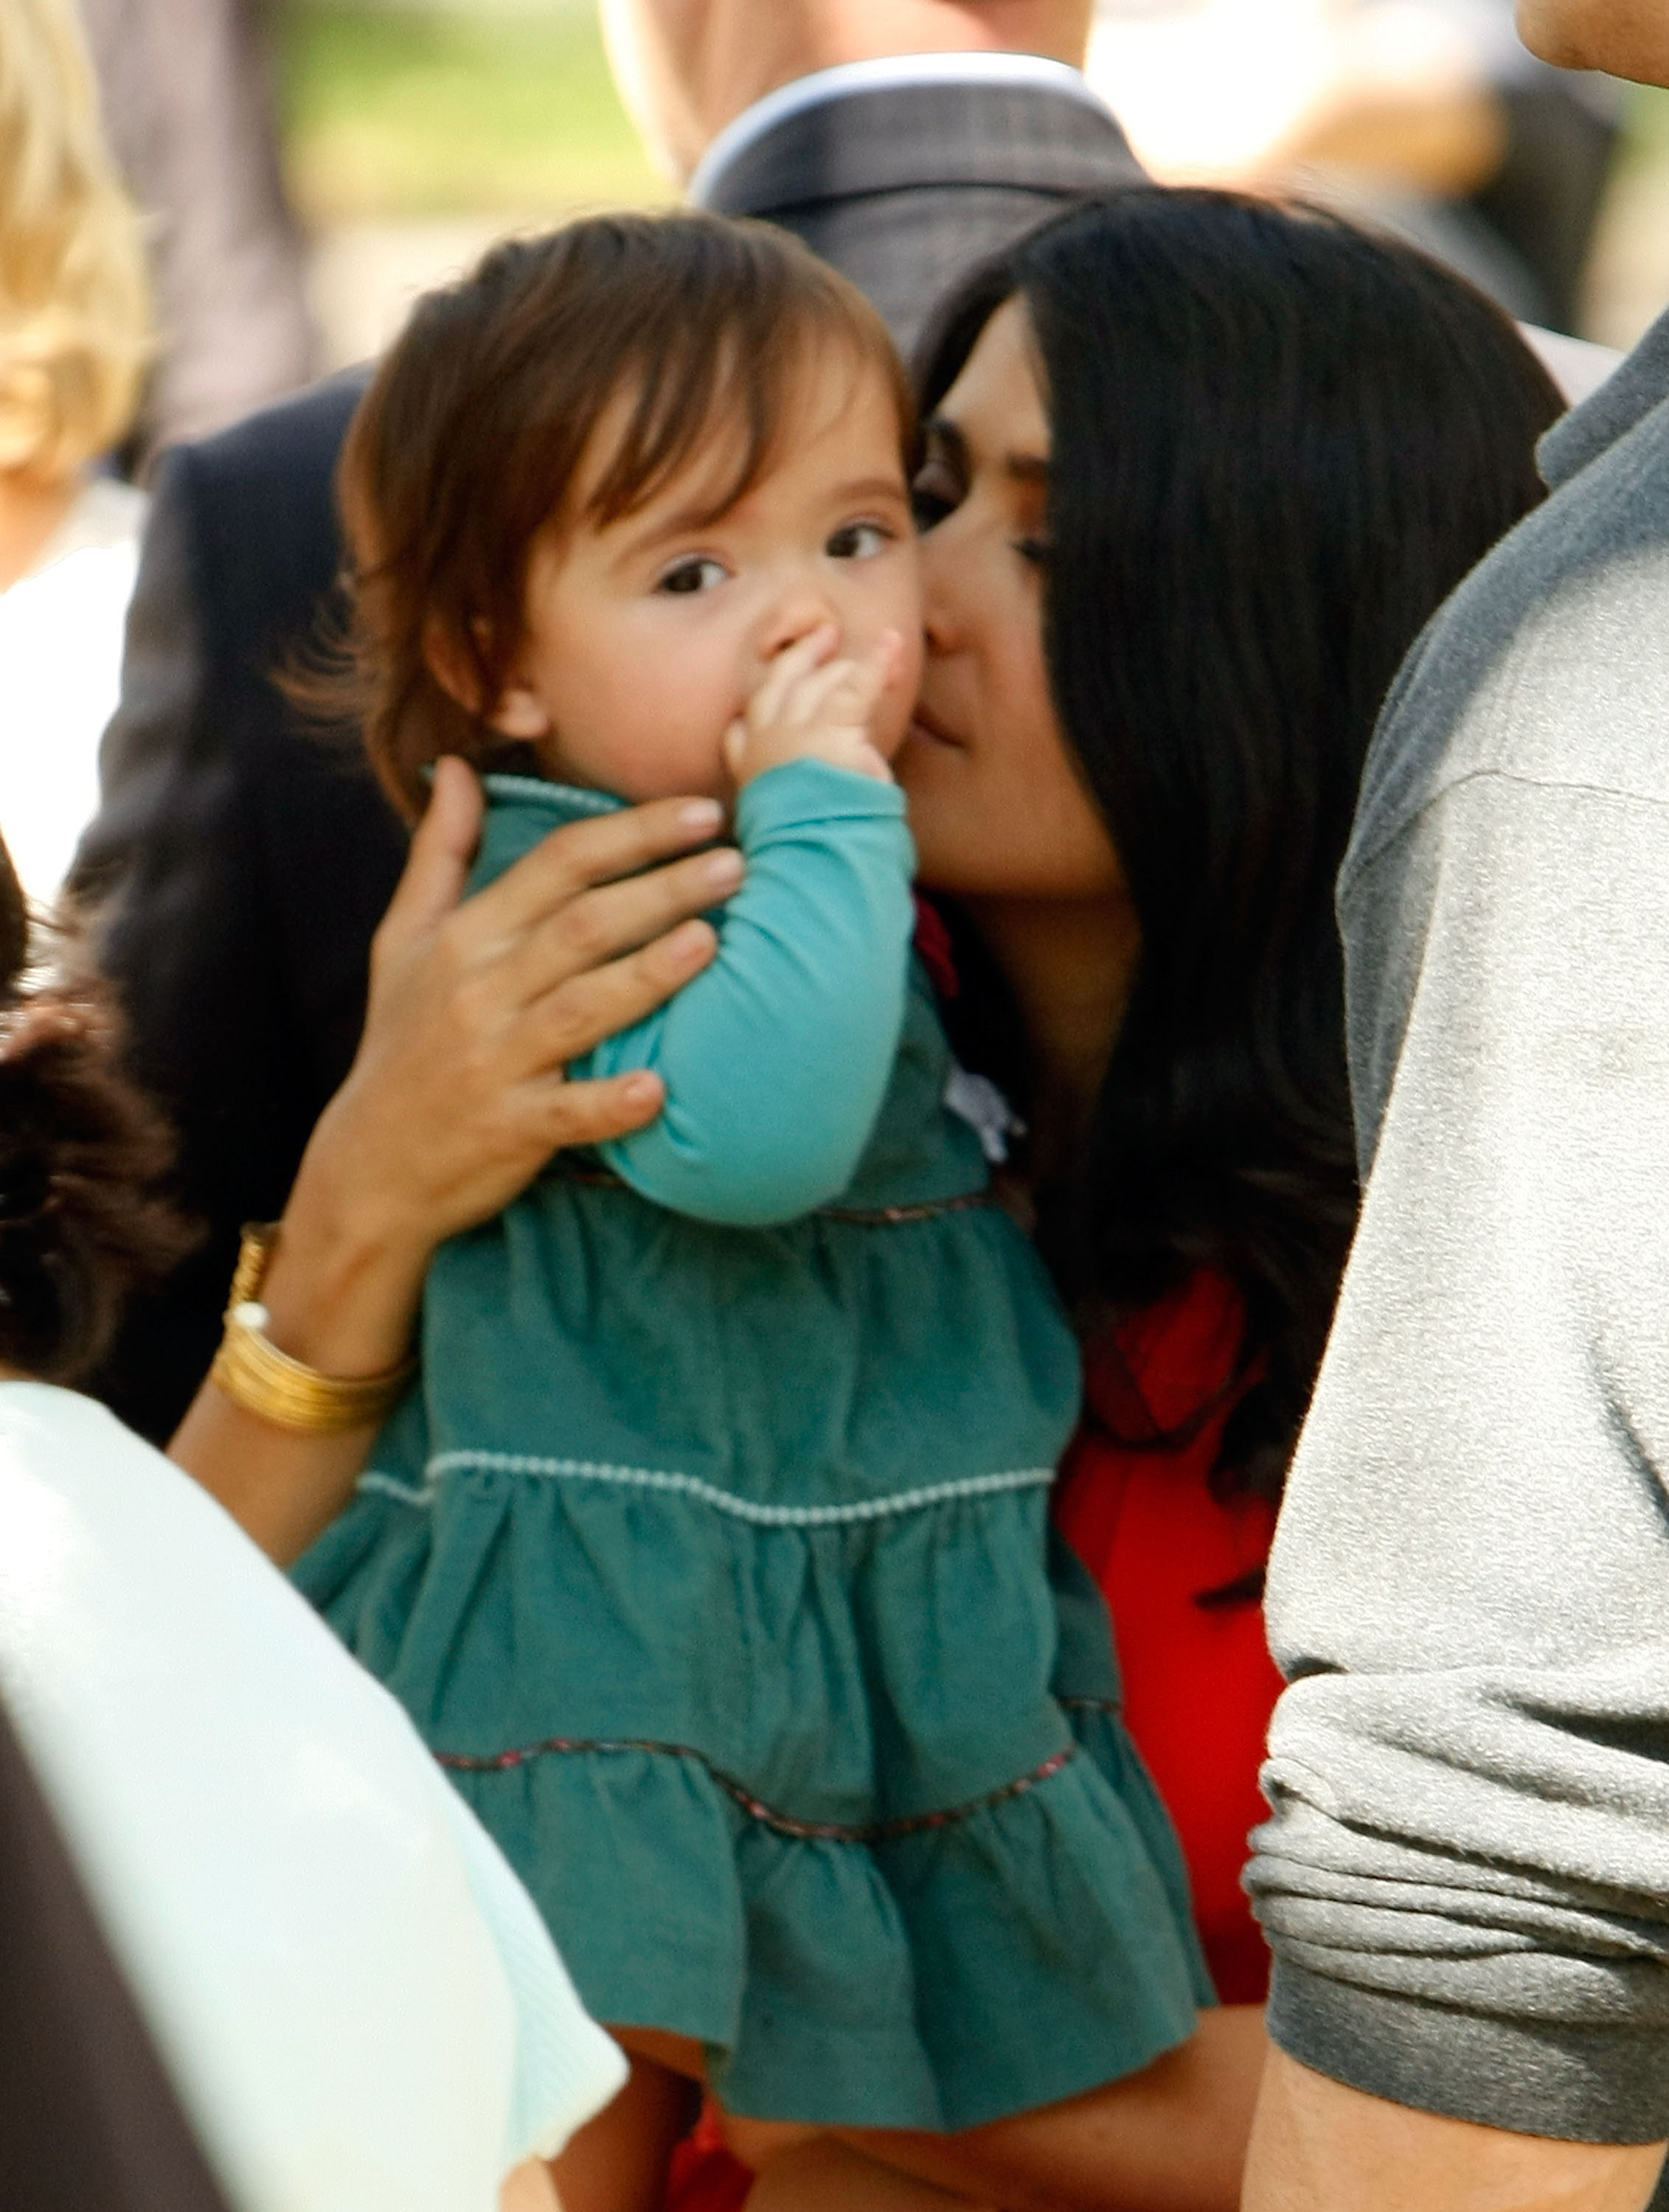 Salma Hayek and her baby Valentina filming on location for "30 Rock" on October 10, 2008 in New York City | Source: Getty Images